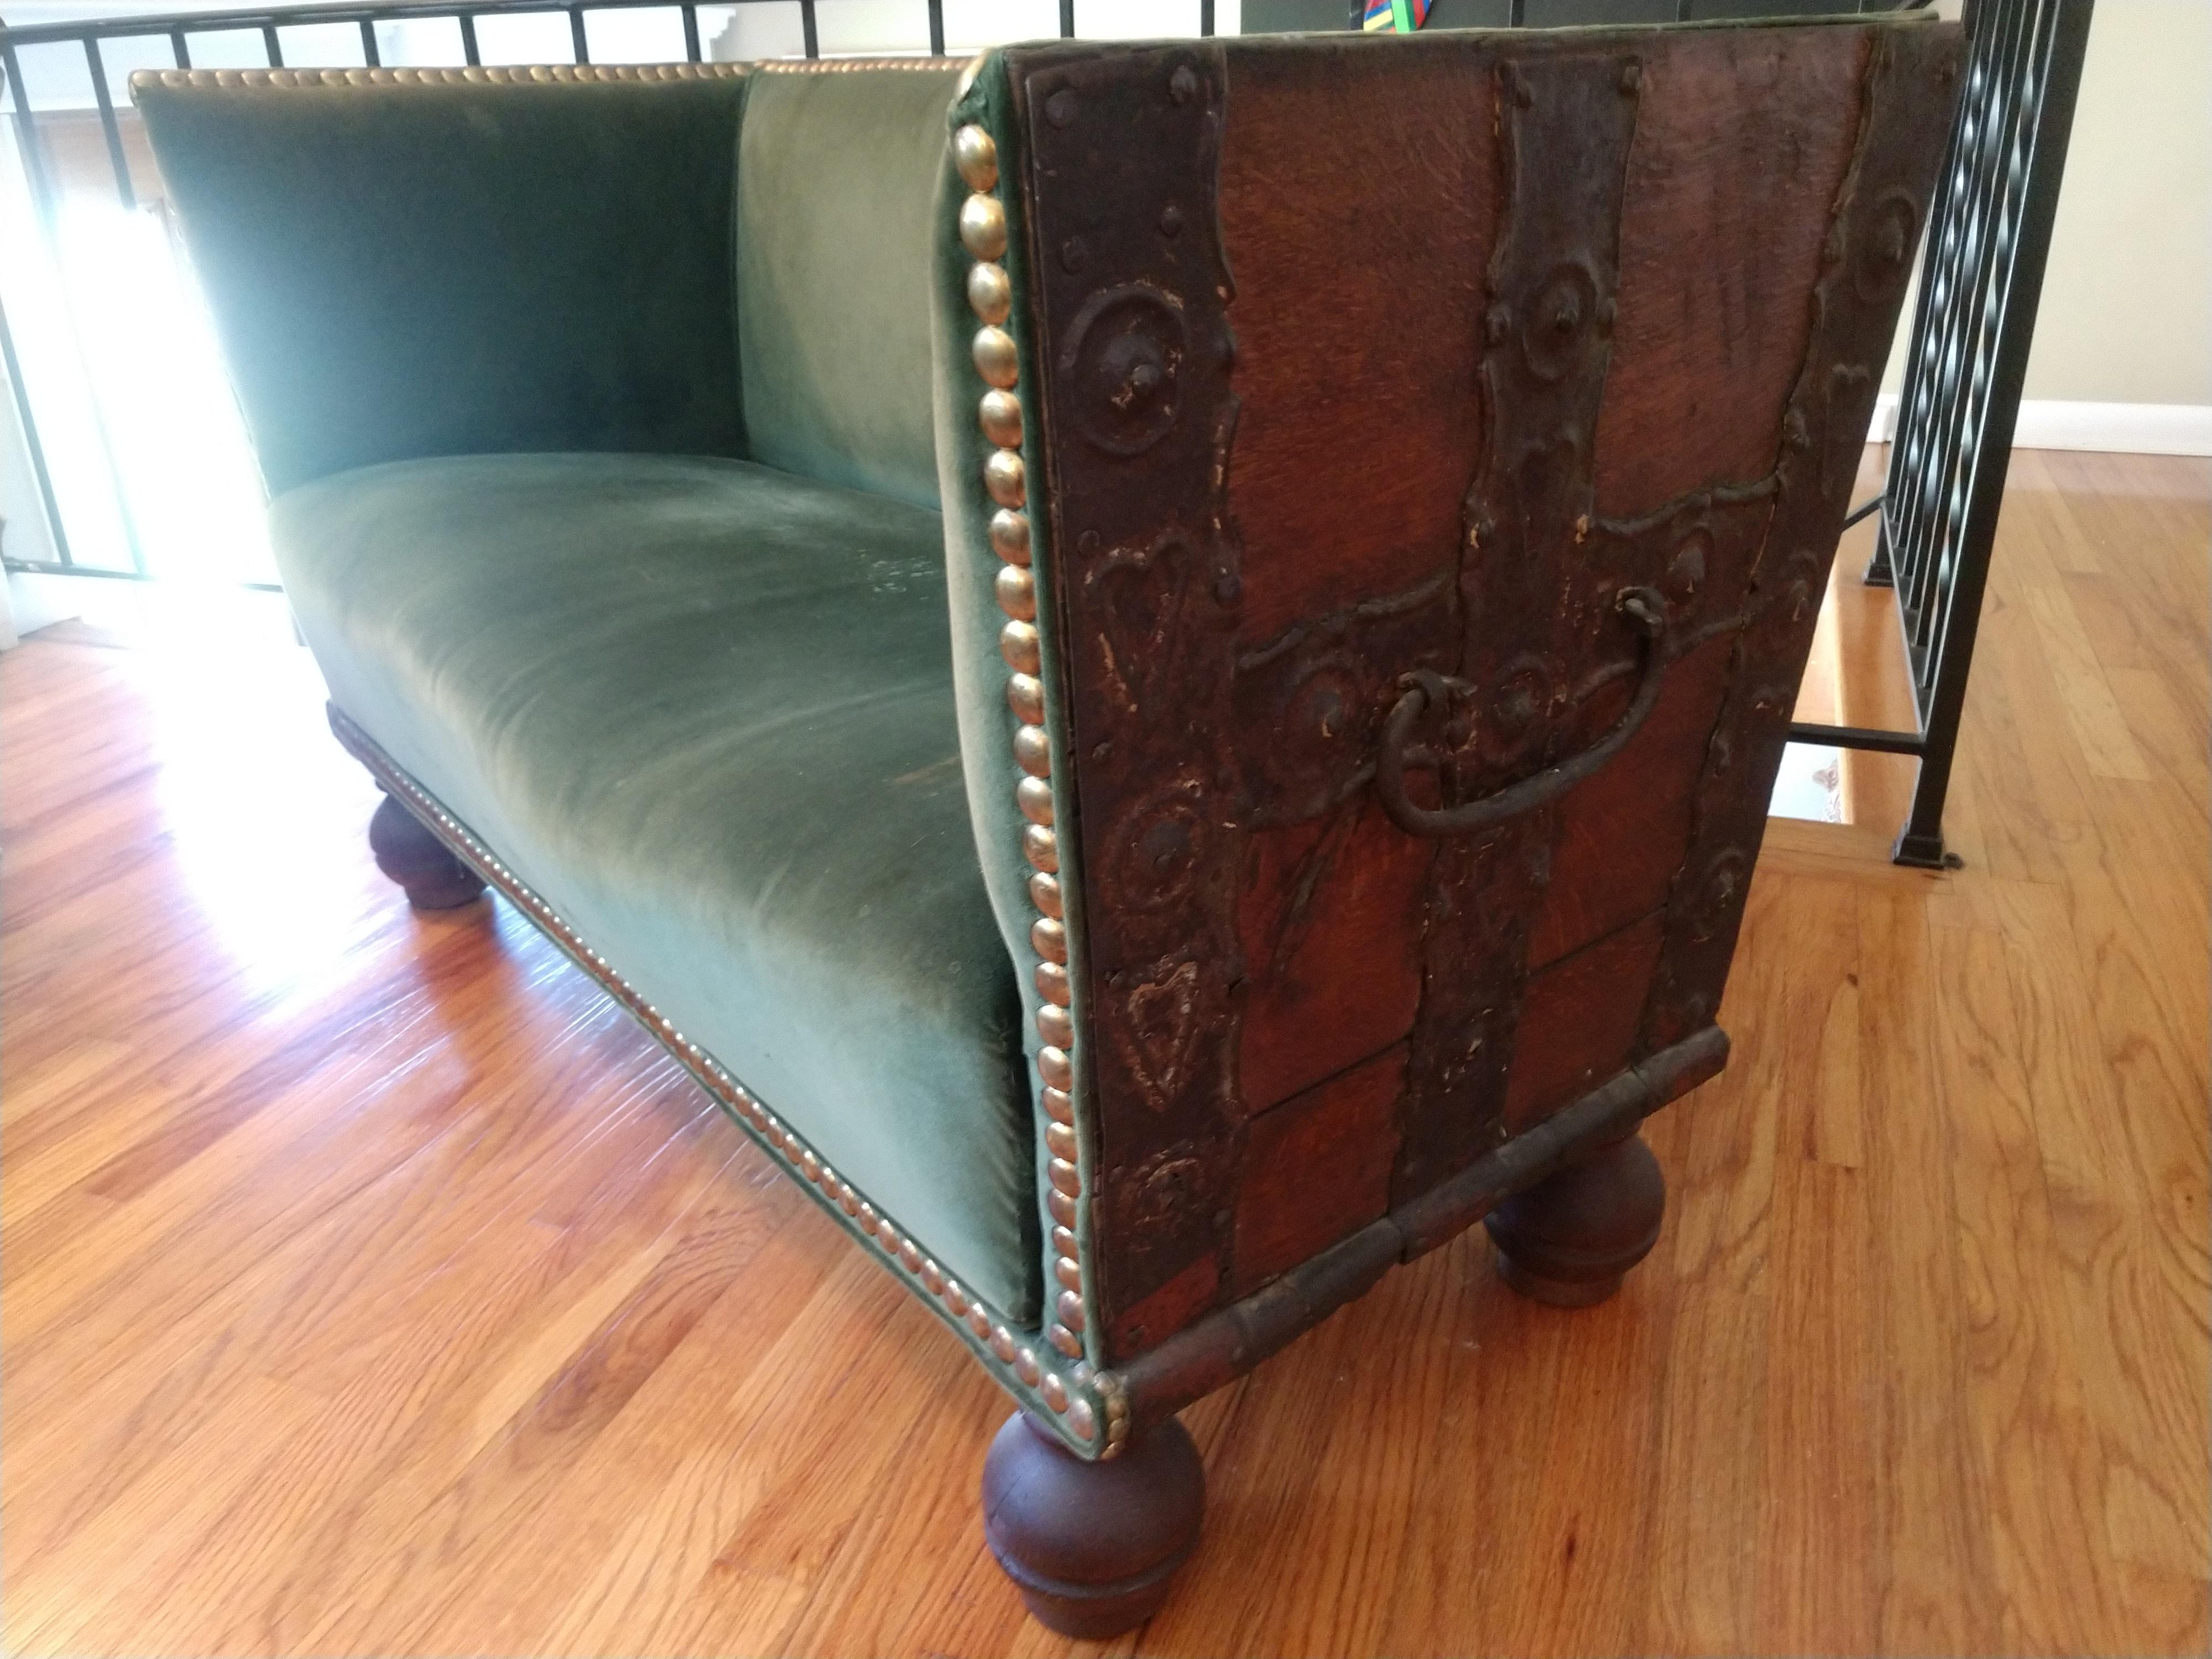 Fabulous transformation of a 18th century treasure chest remnant into an amazing love seat / lounge chair. Probably outfitted in the fifties with mohair upholstery and large button tacks. Sitting on ball feet a real striking piece. Photos cannot